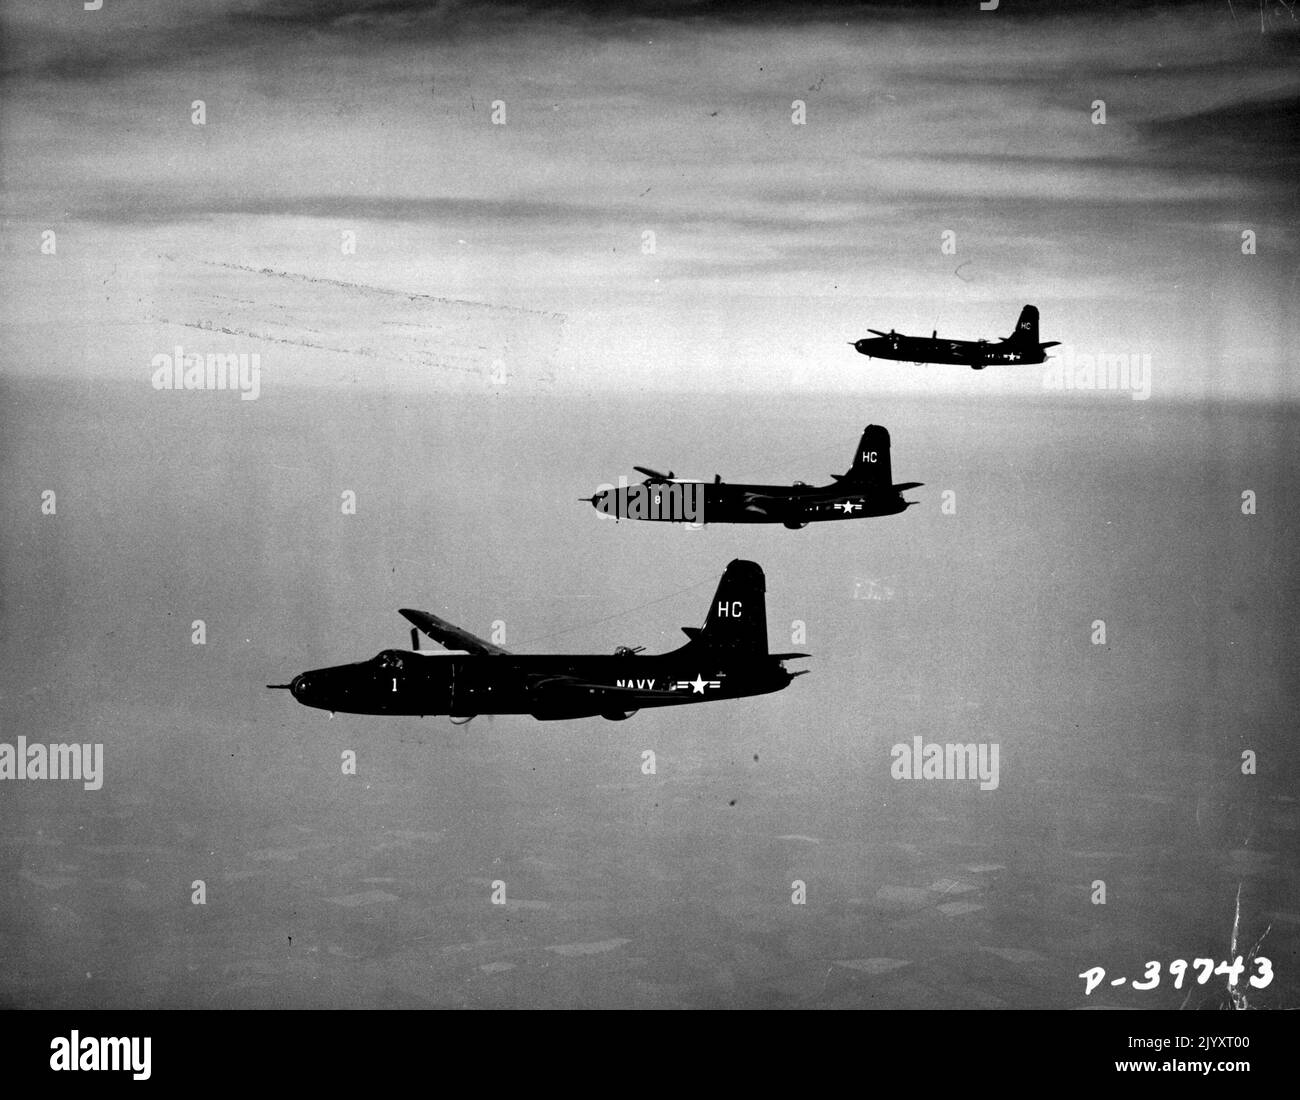 Rockettes Of The Air -- Navy pilots demonstrate their skill in flying formation with Martin P4M-1 Mercators, long-range patrol airplanes. The big four-engine (two piston, two jet) planes built by The Glenn L. Martin Company for the Navy are in service with VP-21,a Fleet squadron based at the Naval Air Test Center, Patuxent River, Maryland. While the Mercators look like a twin-engine aircraft, each nacelle for Pratt & Whitney R-4360 piston engines also houses an Allison J-33 jet for additional power. and speed when needed. For their role as anti-submarine planes, Mercators are equipped with the Stock Photo